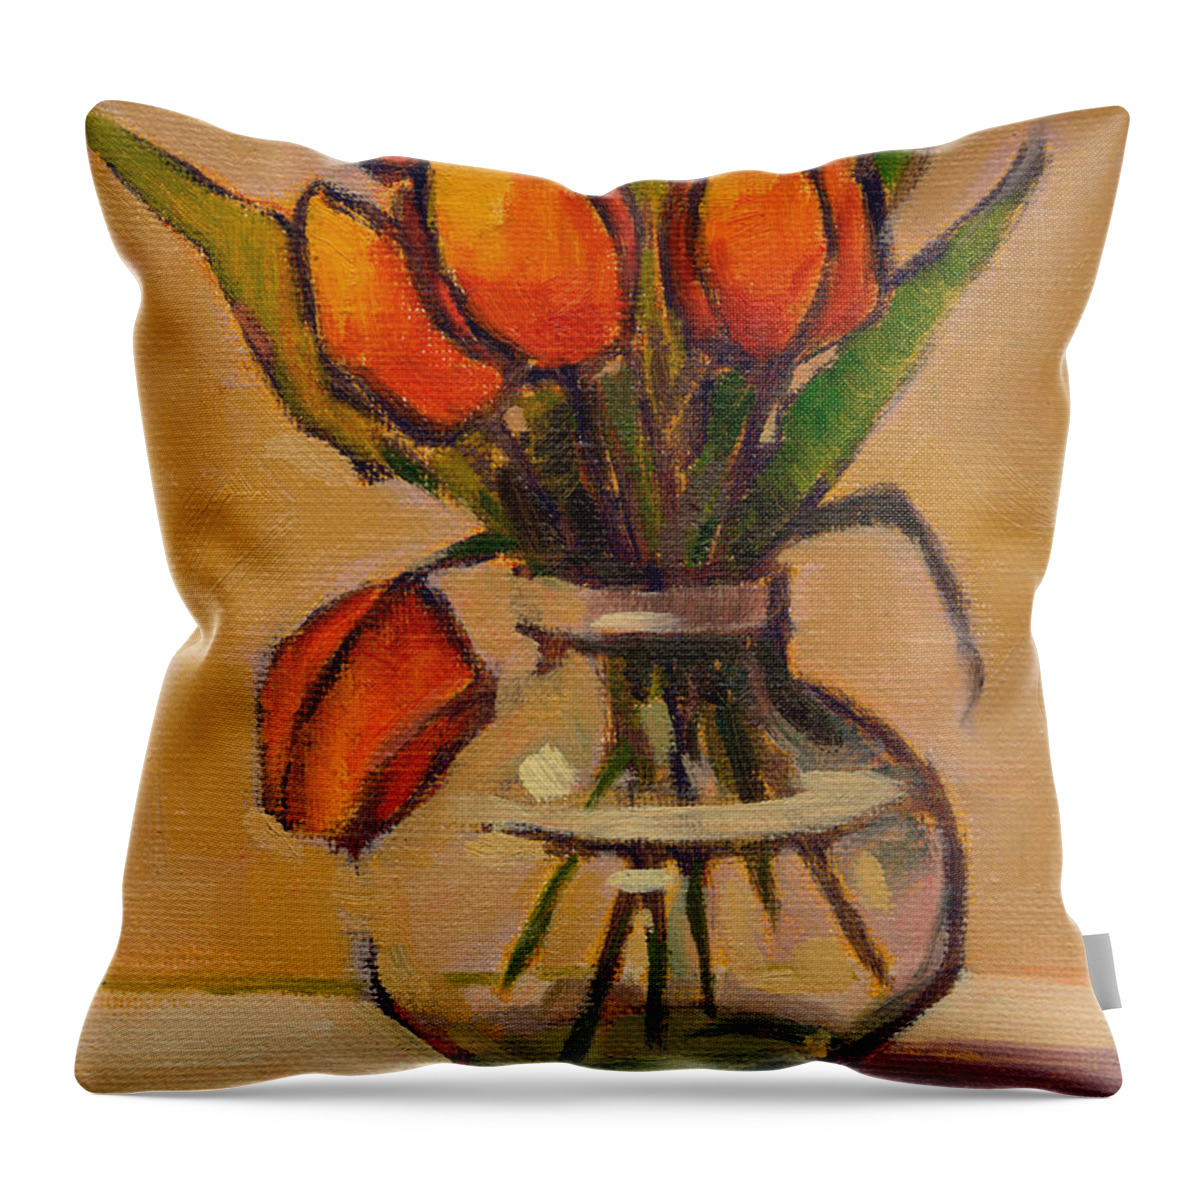 Tulips Throw Pillow featuring the painting Orange Tulips by Konnie Kim